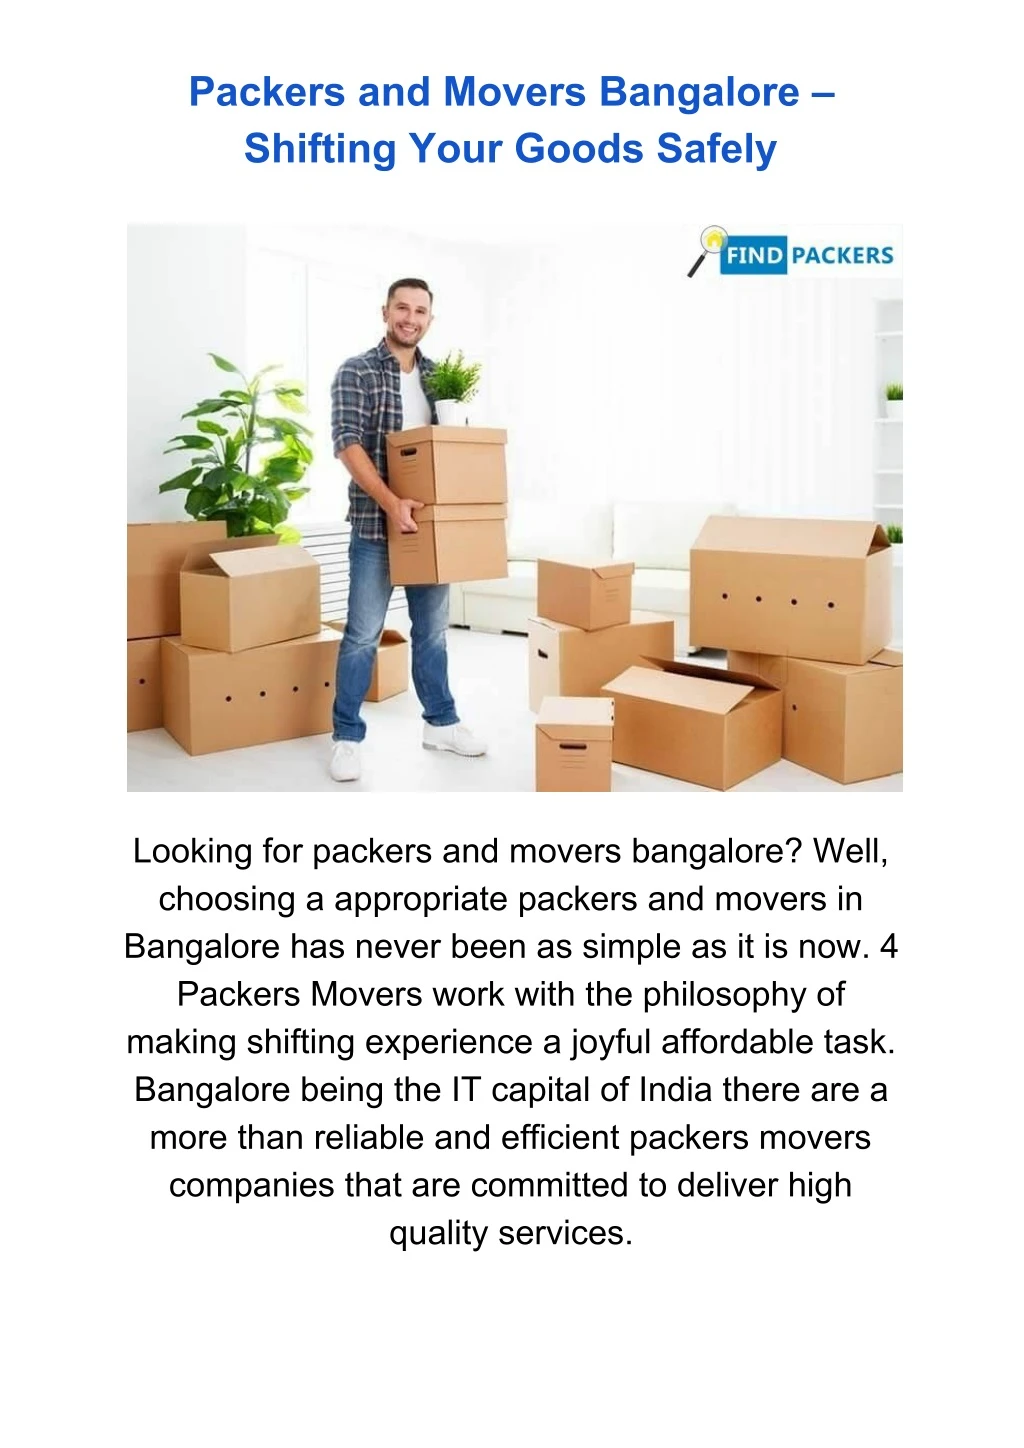 packers and movers bangalore shifting your goods